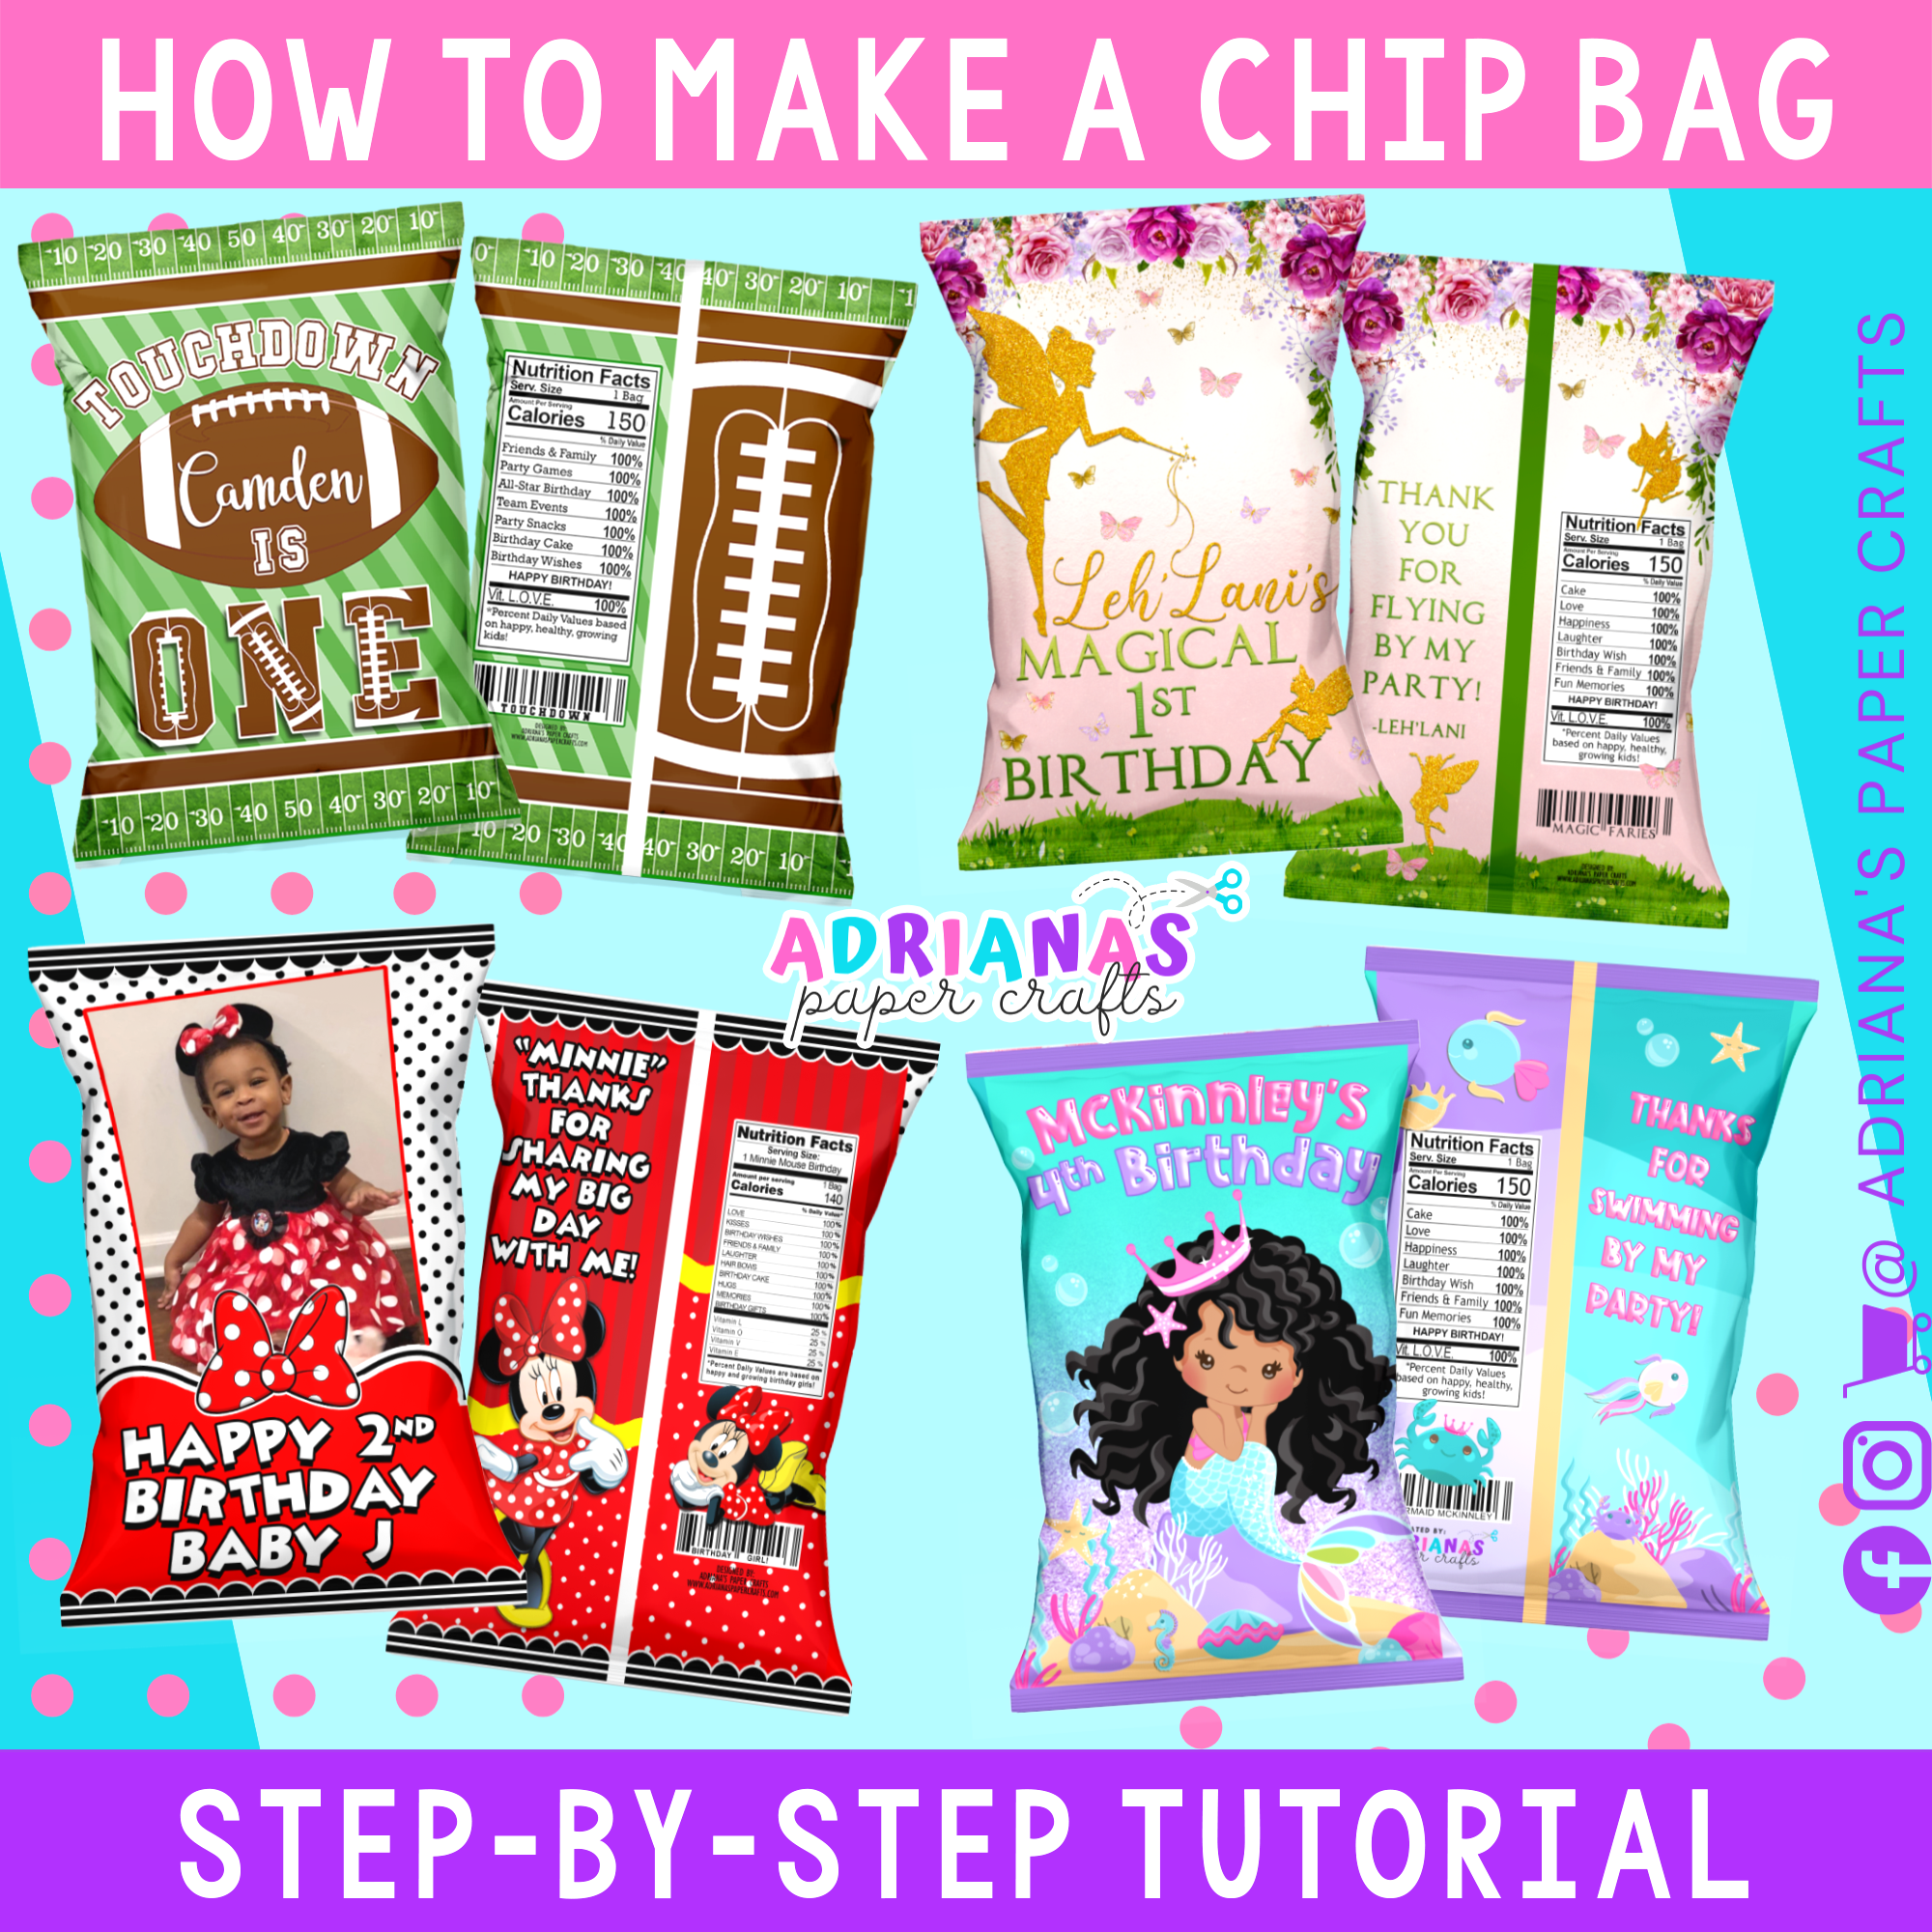 How to make a custom chip bag in 5 steps!